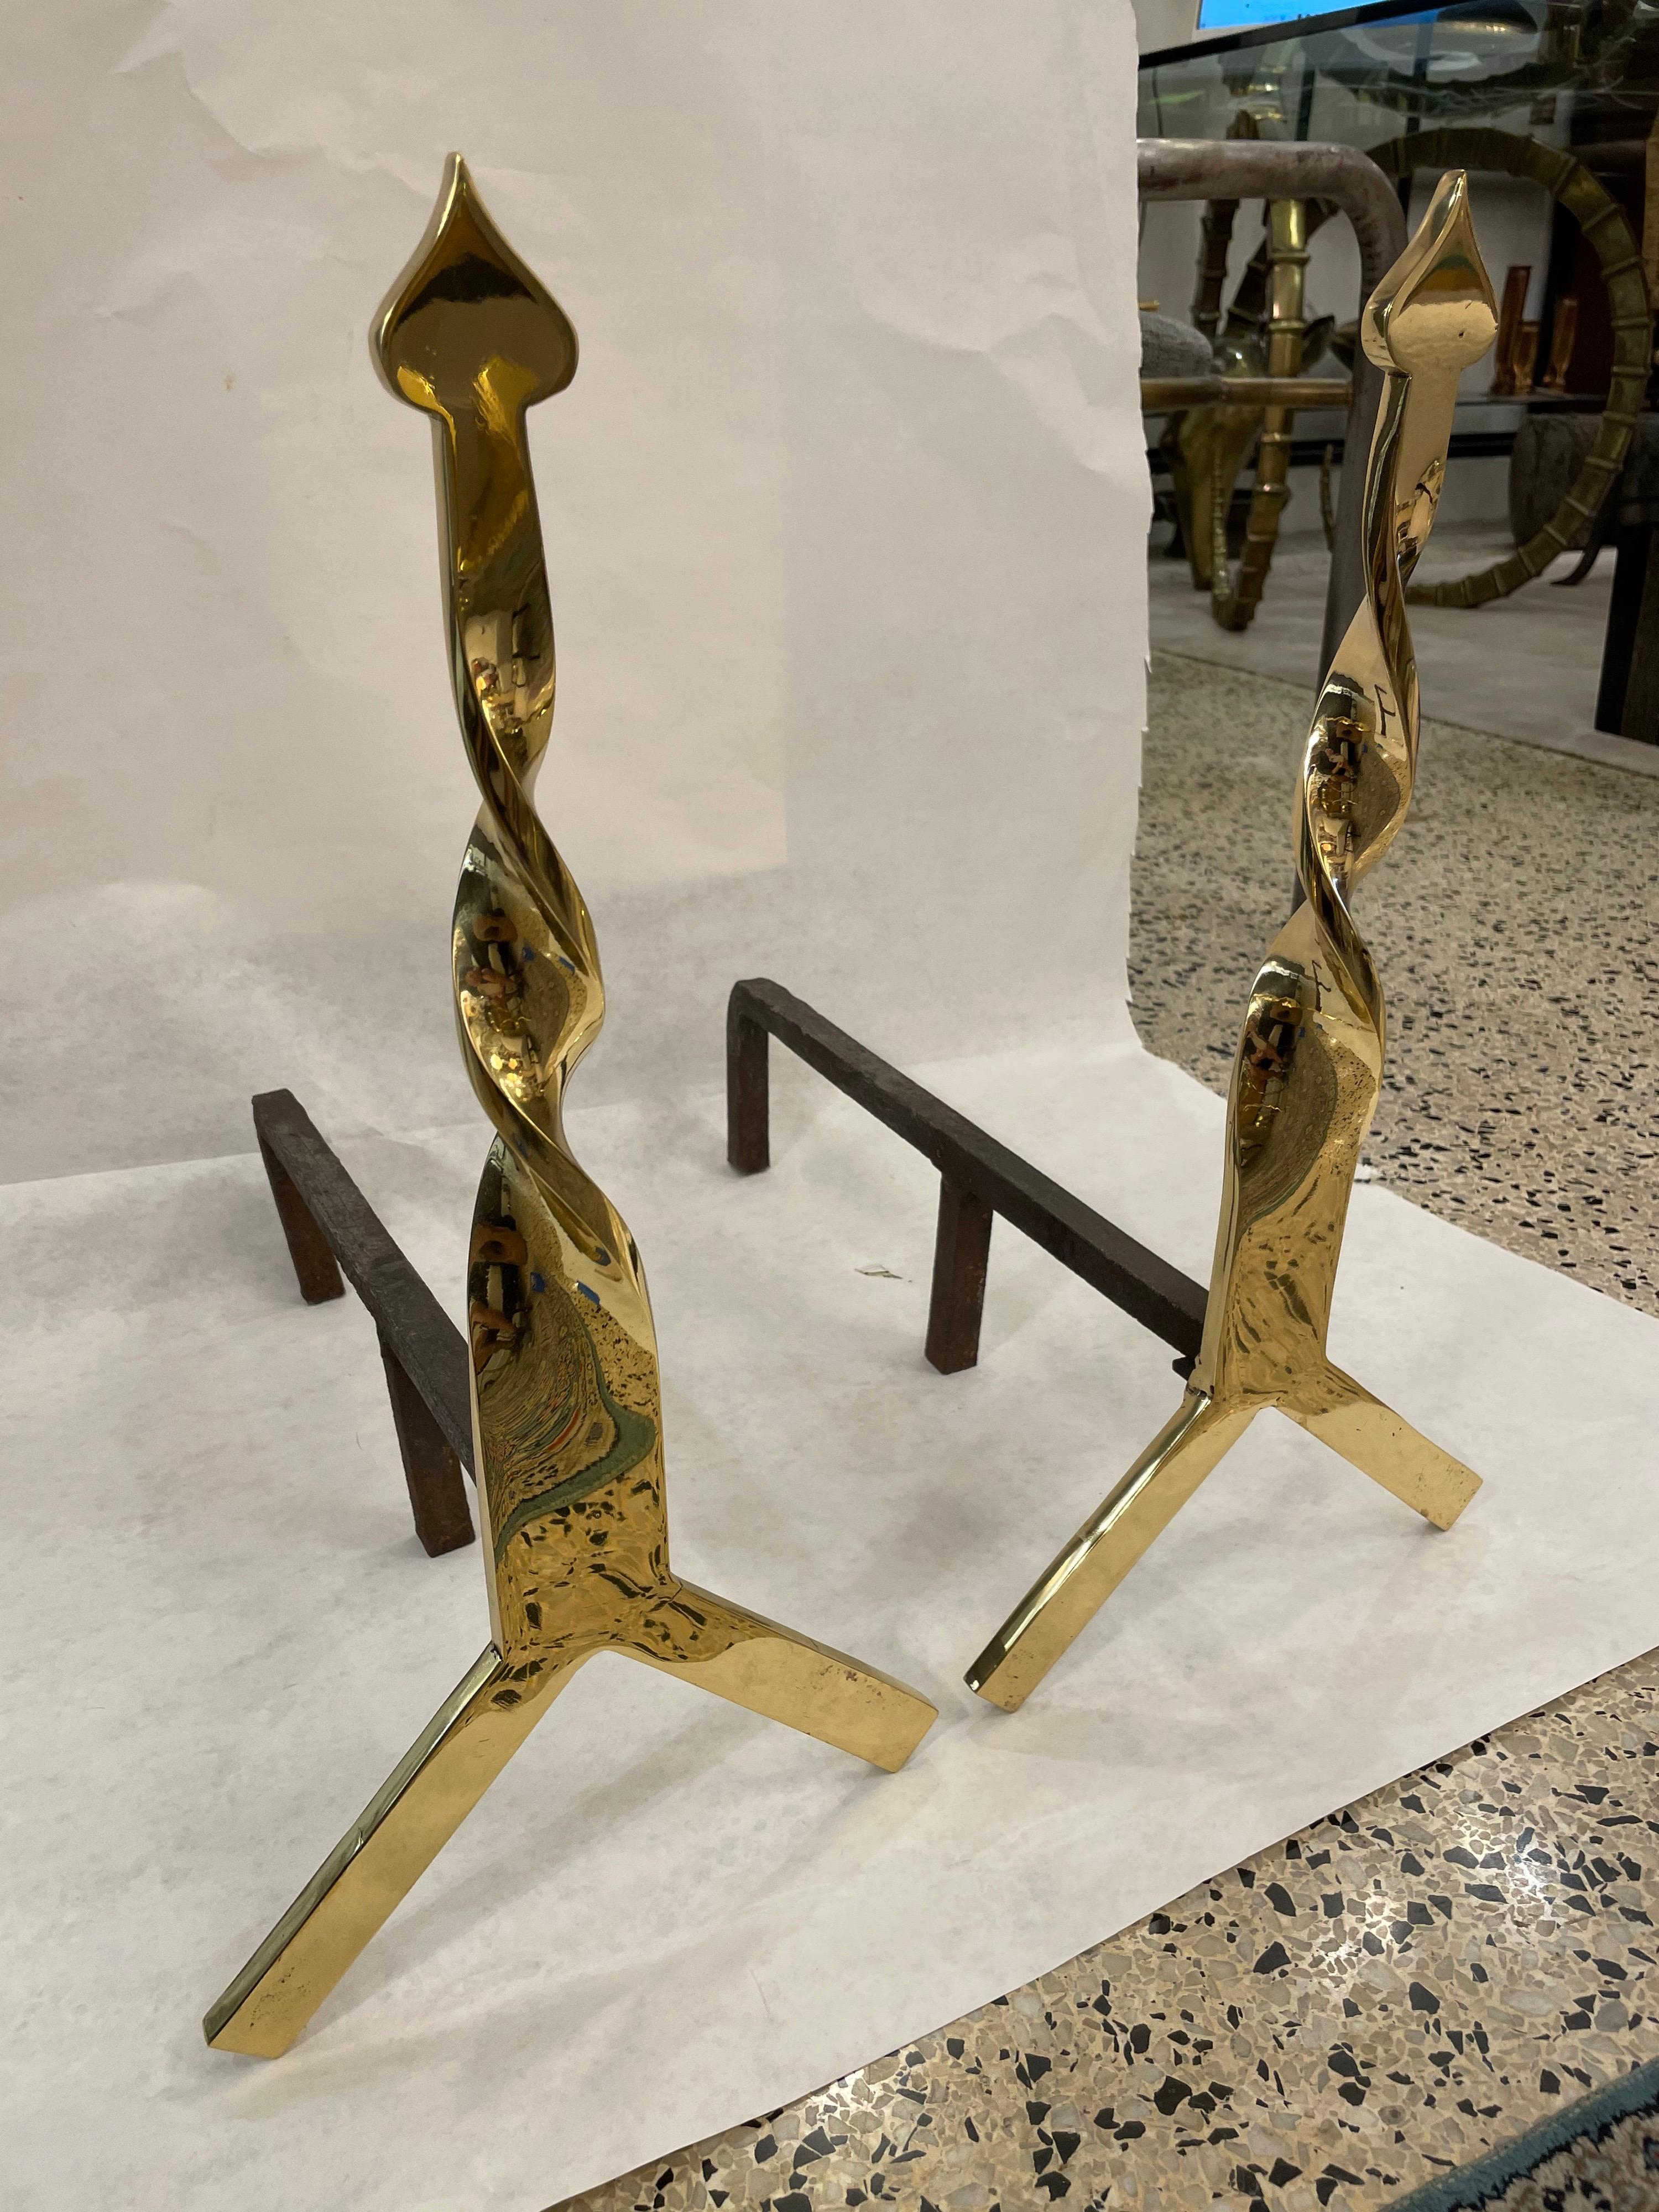 These simple and yet classic designed andirons in a polished brass with twisted neck and spade finial.